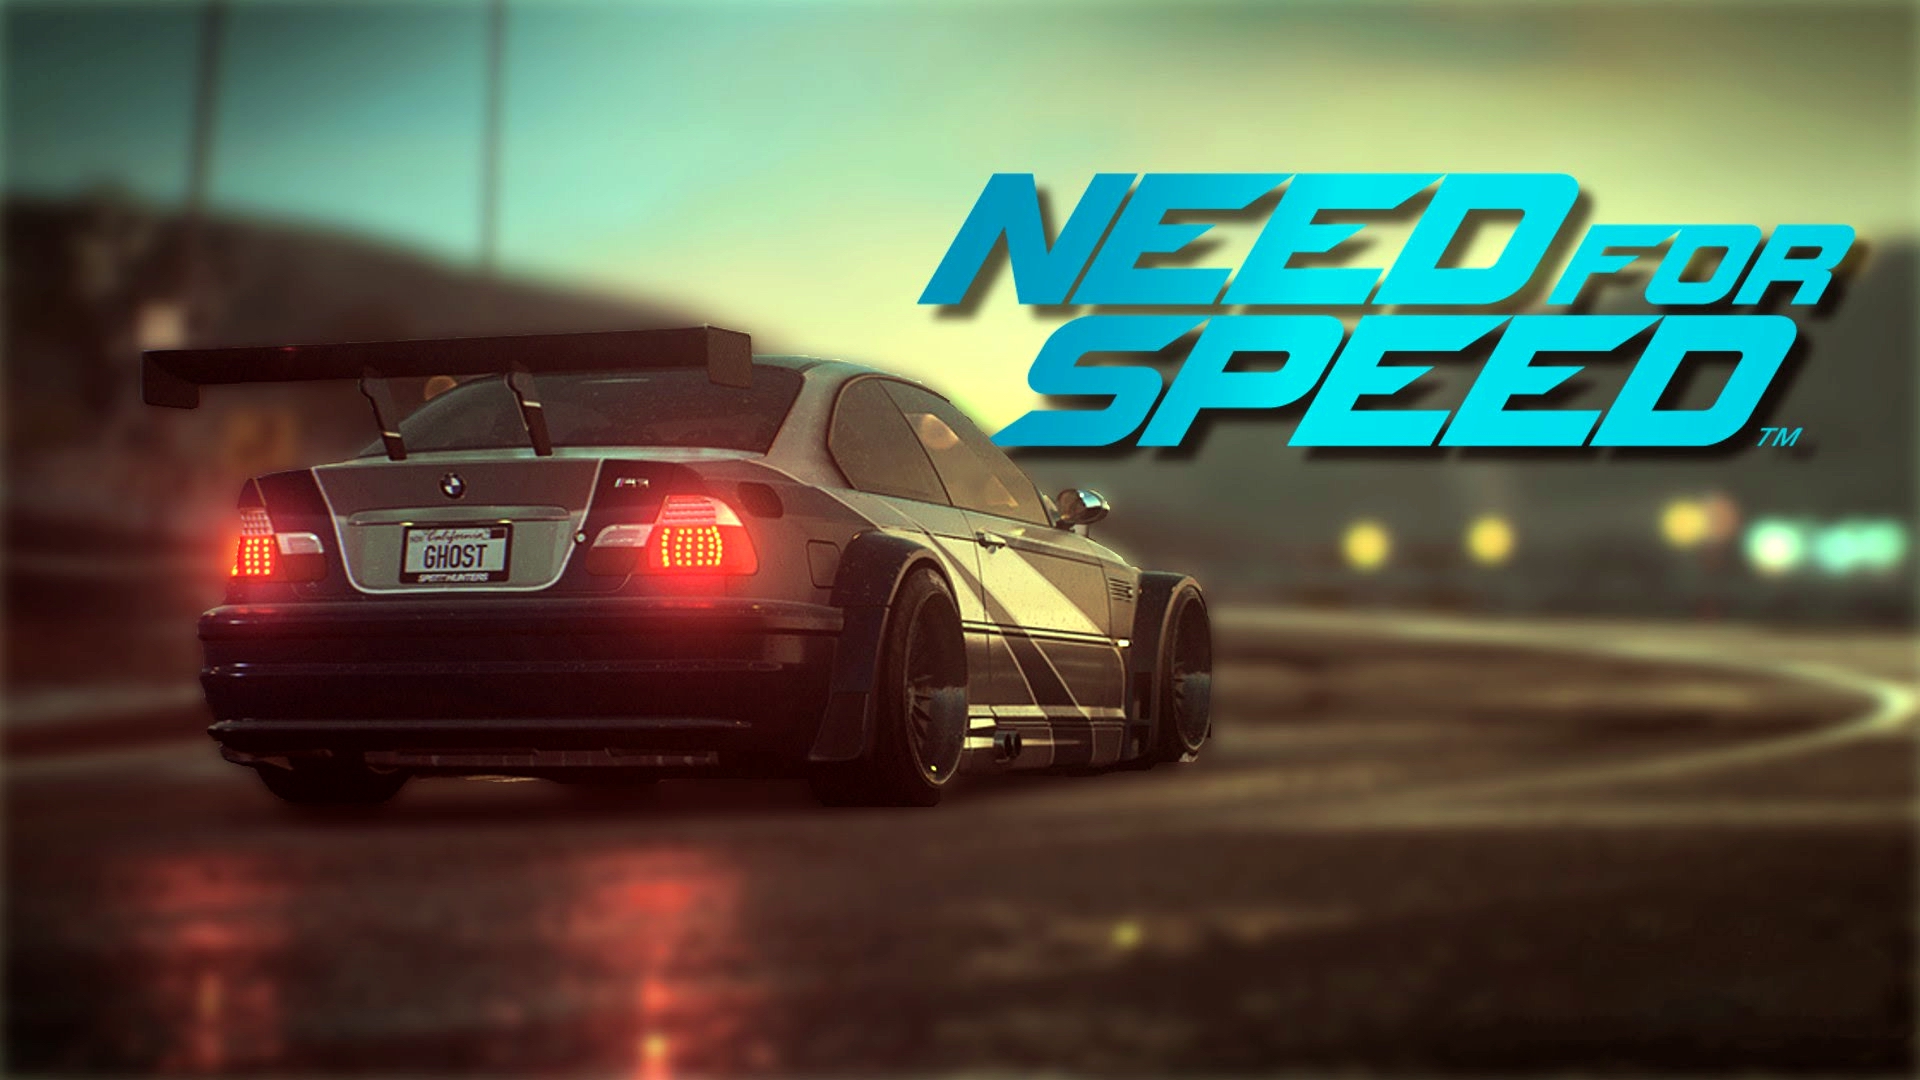 Nfs assemble. Need for Speed 2015 ps4. Need for Speed (игра, 2015). Нид фор СПИД NFS 2015. Need for Speed most wanted Payback.